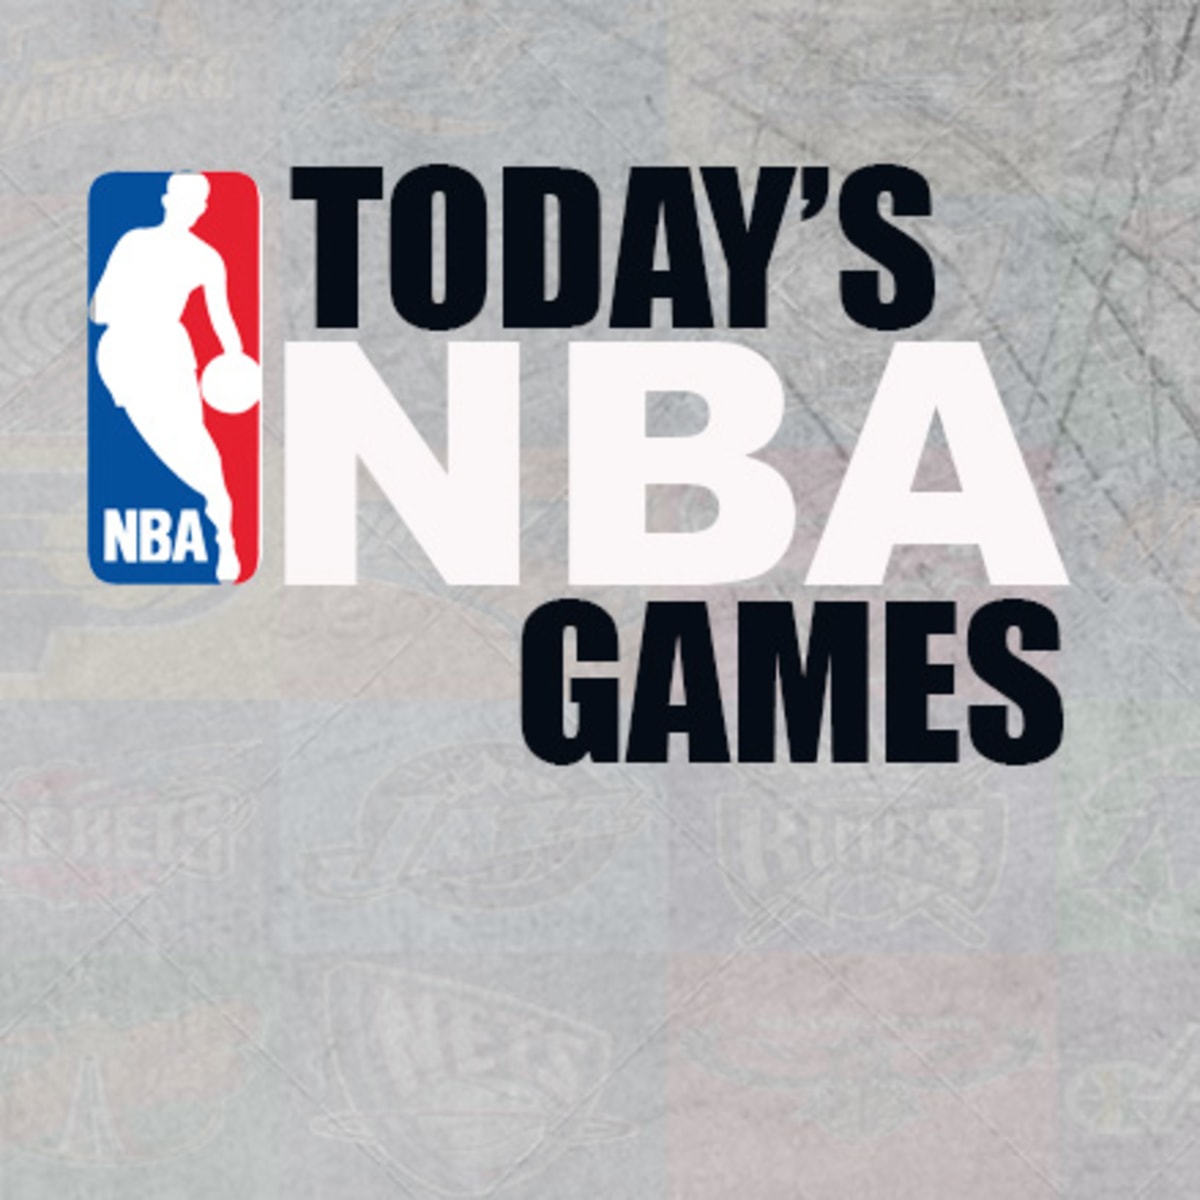 NBA Games on TV Today (Friday, Jan